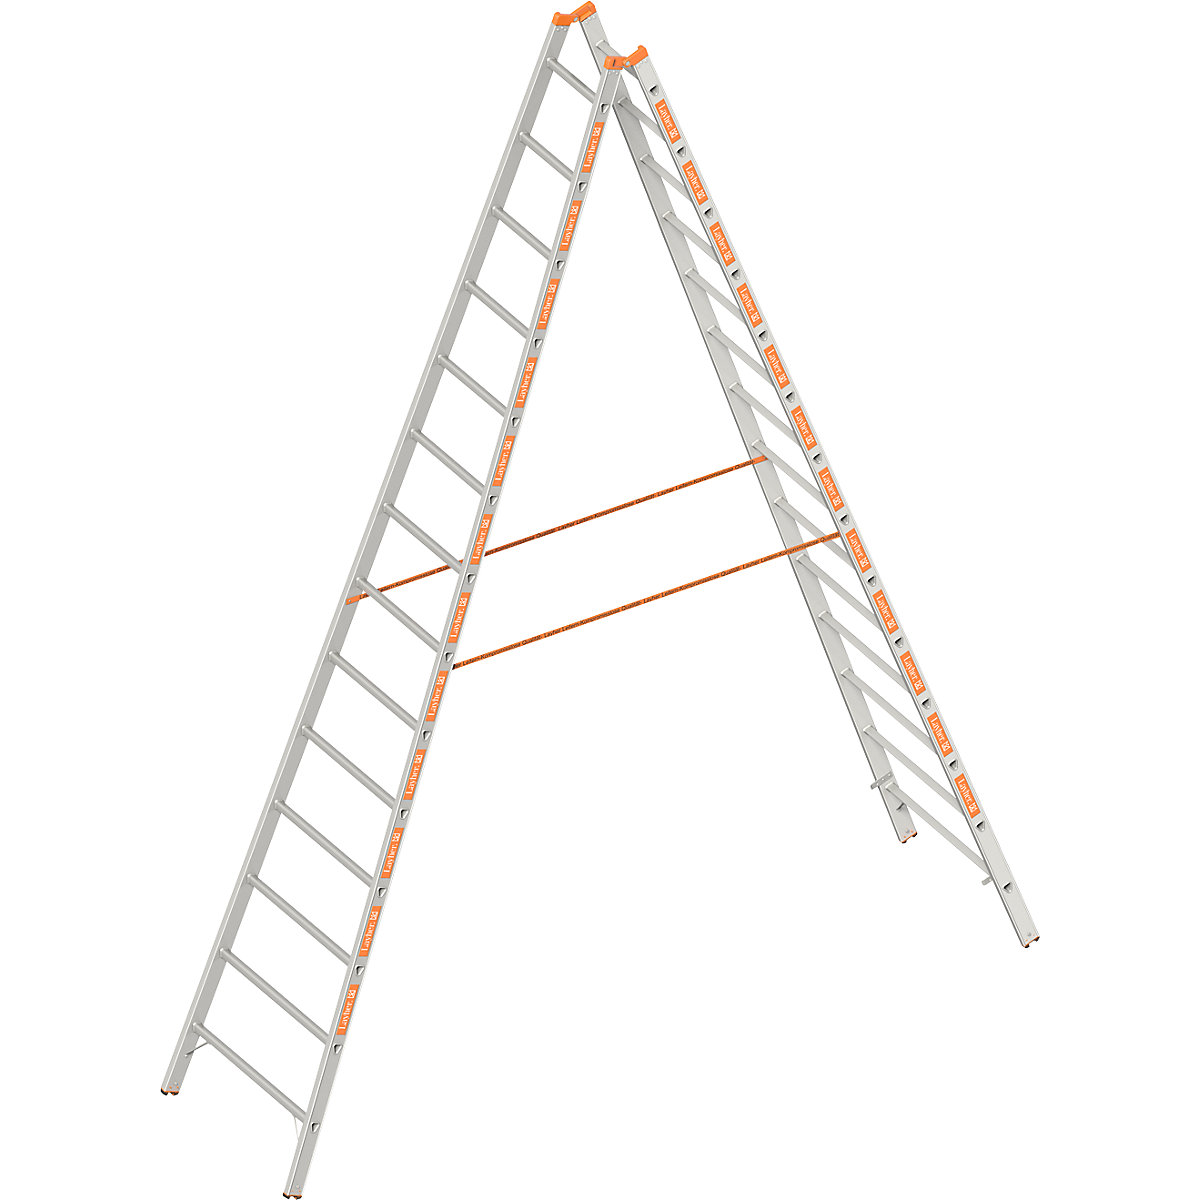 Double sided rung ladder – Layher, double sided access, 2 x 14 rungs-6